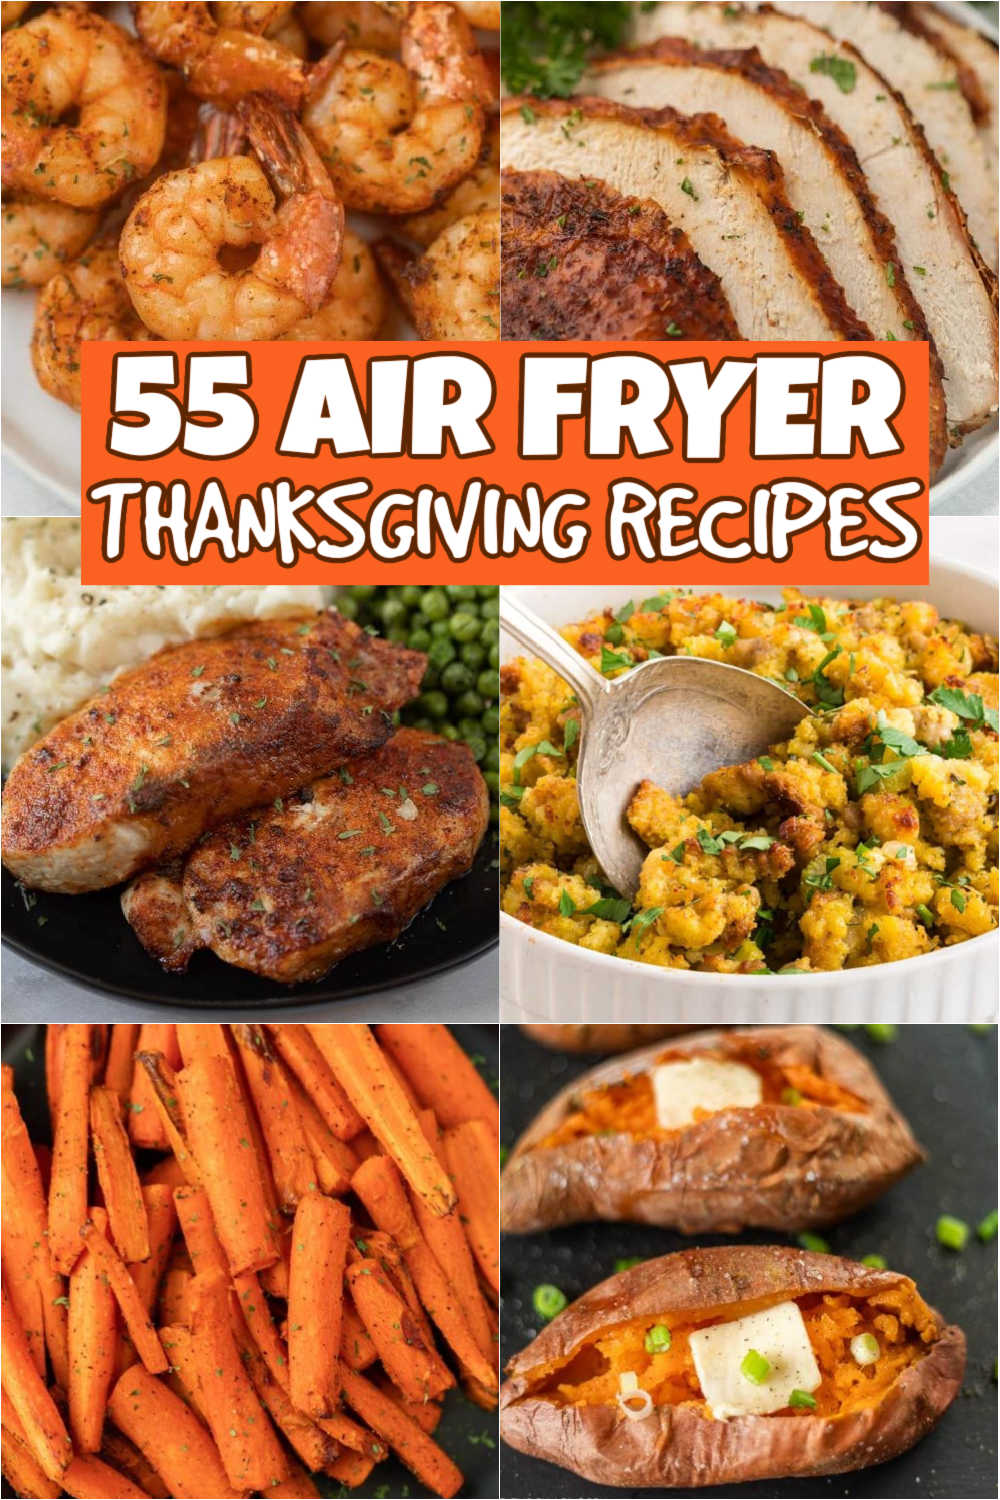 Whip up 55 best air fryer Thanksgiving recipes. These air fryer recipes for Thanksgiving are so delicious and will save you oven space. Holidays are the best time to cook all sorts of delicious dishes. If you have an air fryer at home, you should definitely try these recipes on Thanksgiving. #eatingonadime #airfryerthanksgivingrecipes #airfryerrecipes